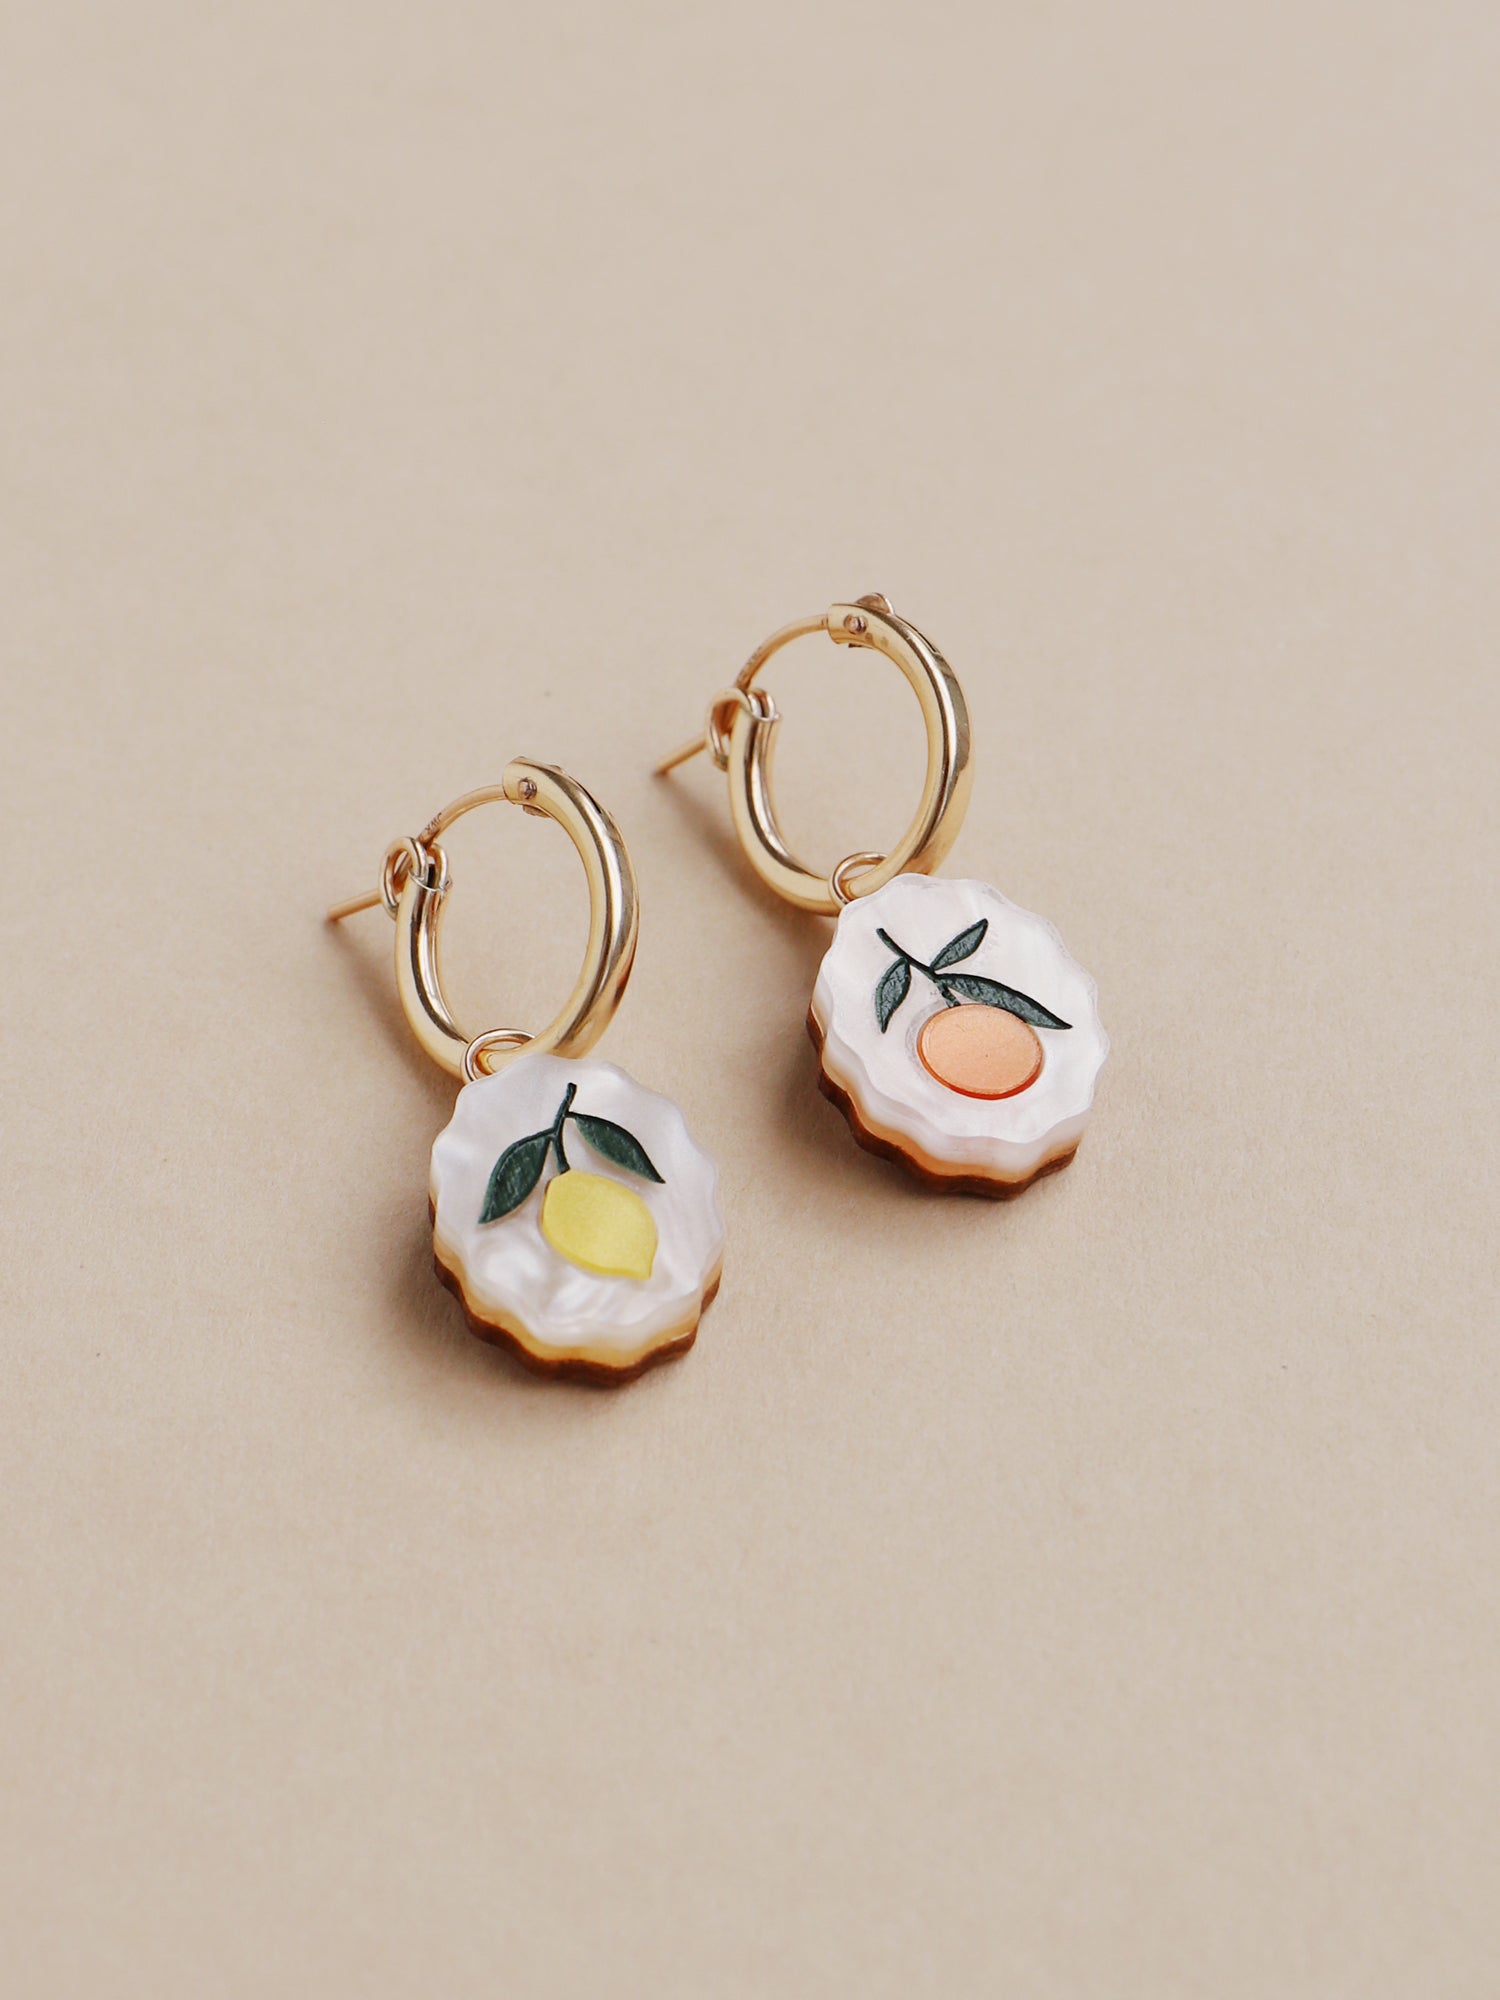 Lemon and orange charm hoop earrings. Made from acrylic and 14k gold-filled hoops & findings.  Handmade in the UK by Wolf & Moon.